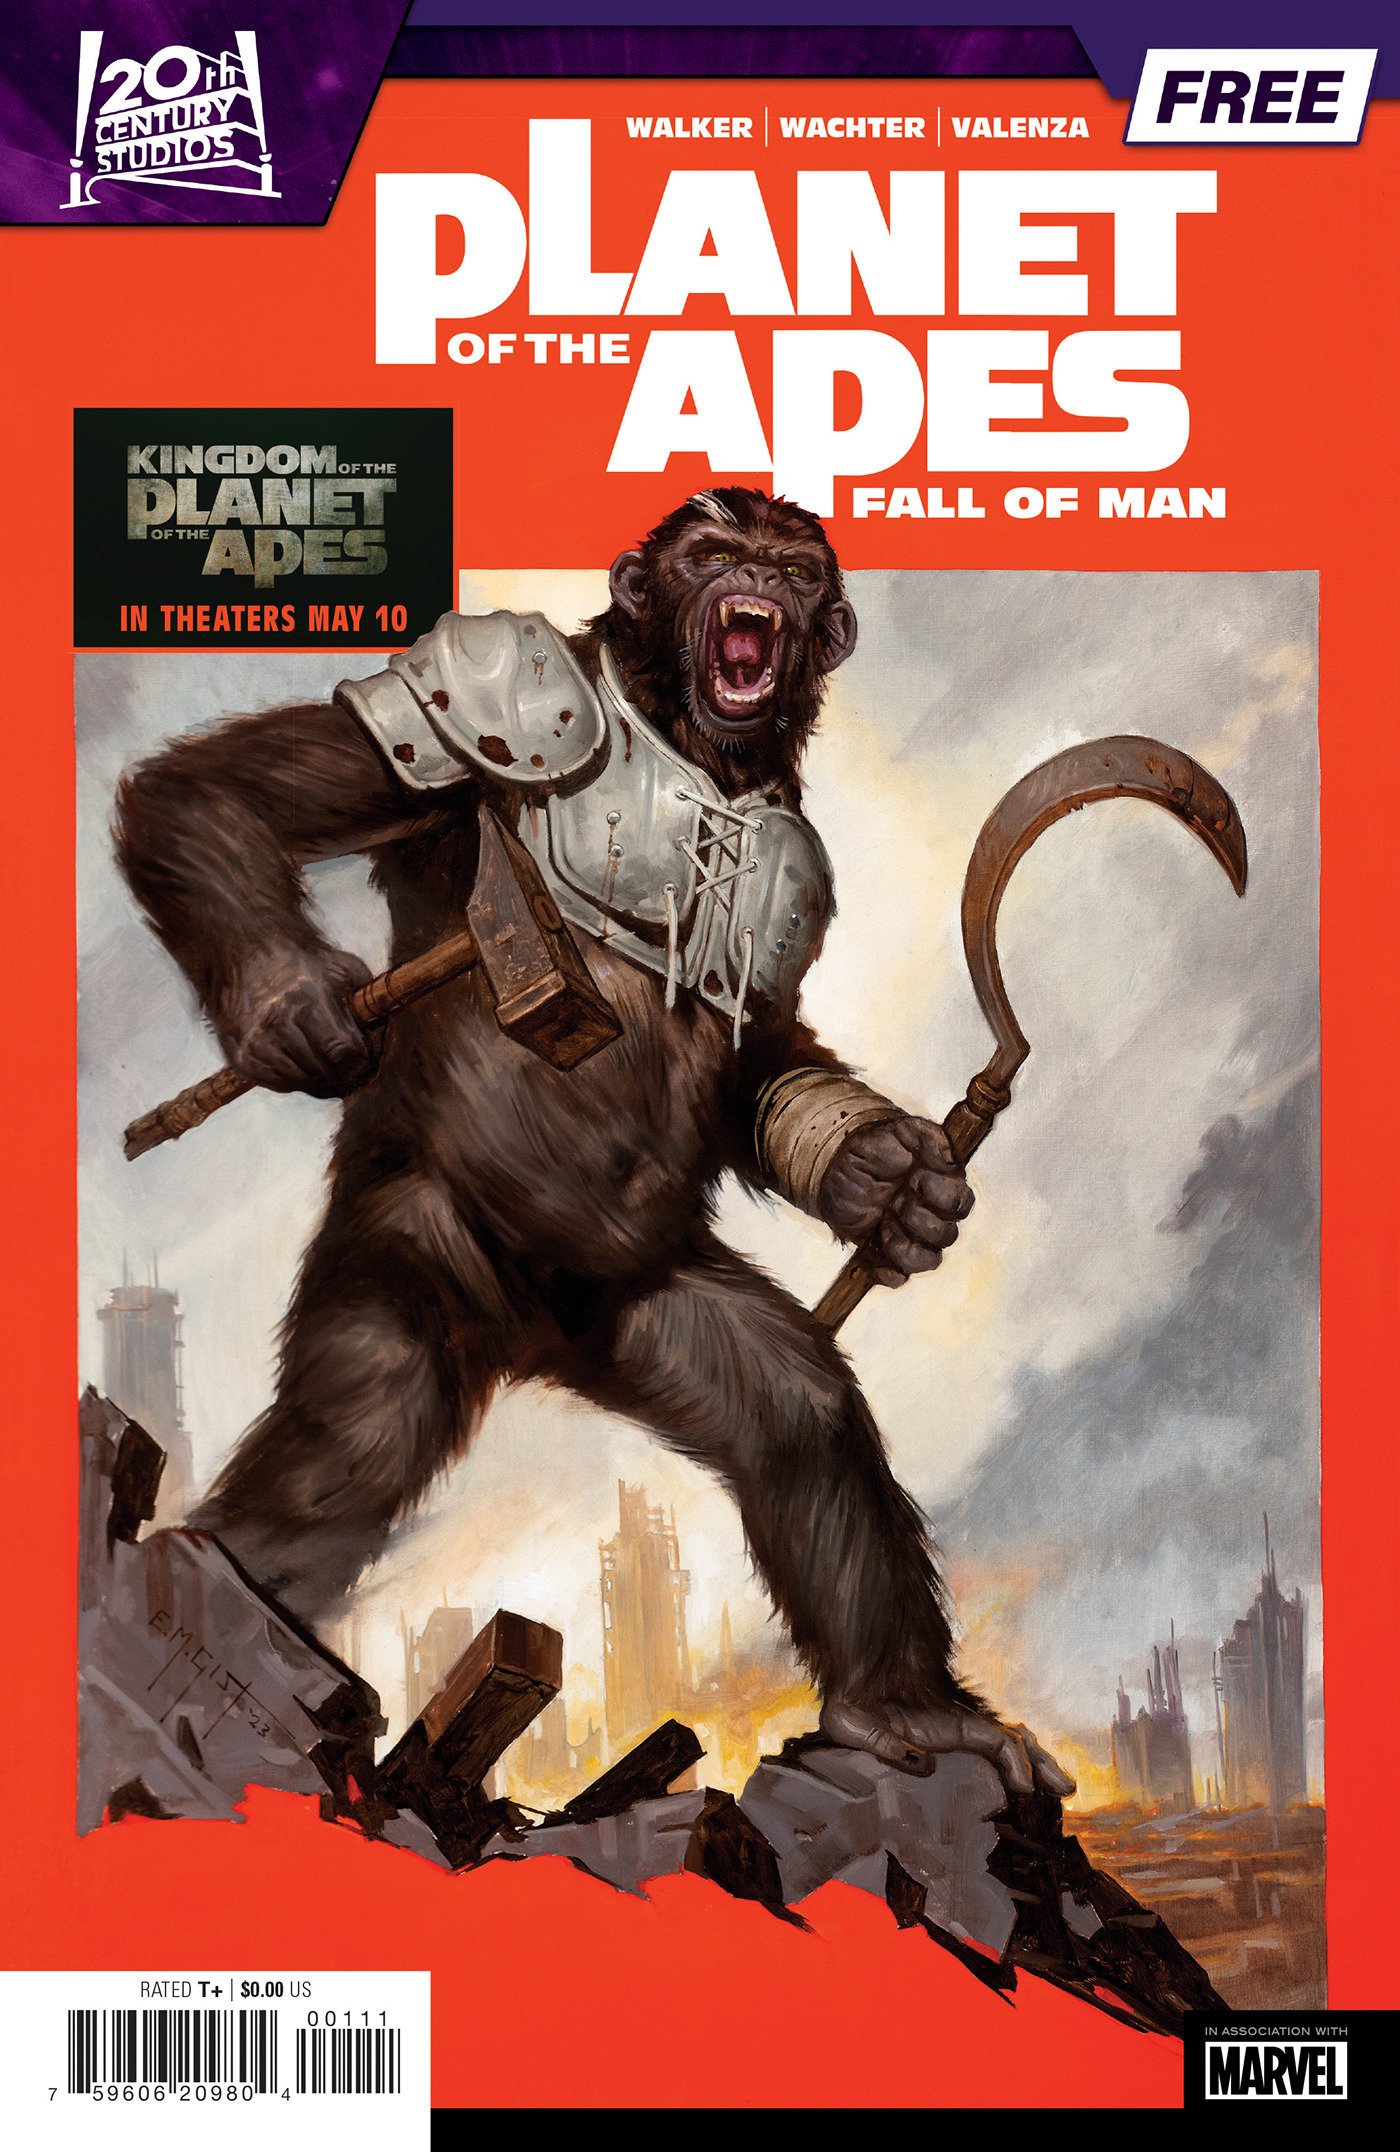 Planet of the Apes Fall of Man Sampler (Bundles of 20) (Net)